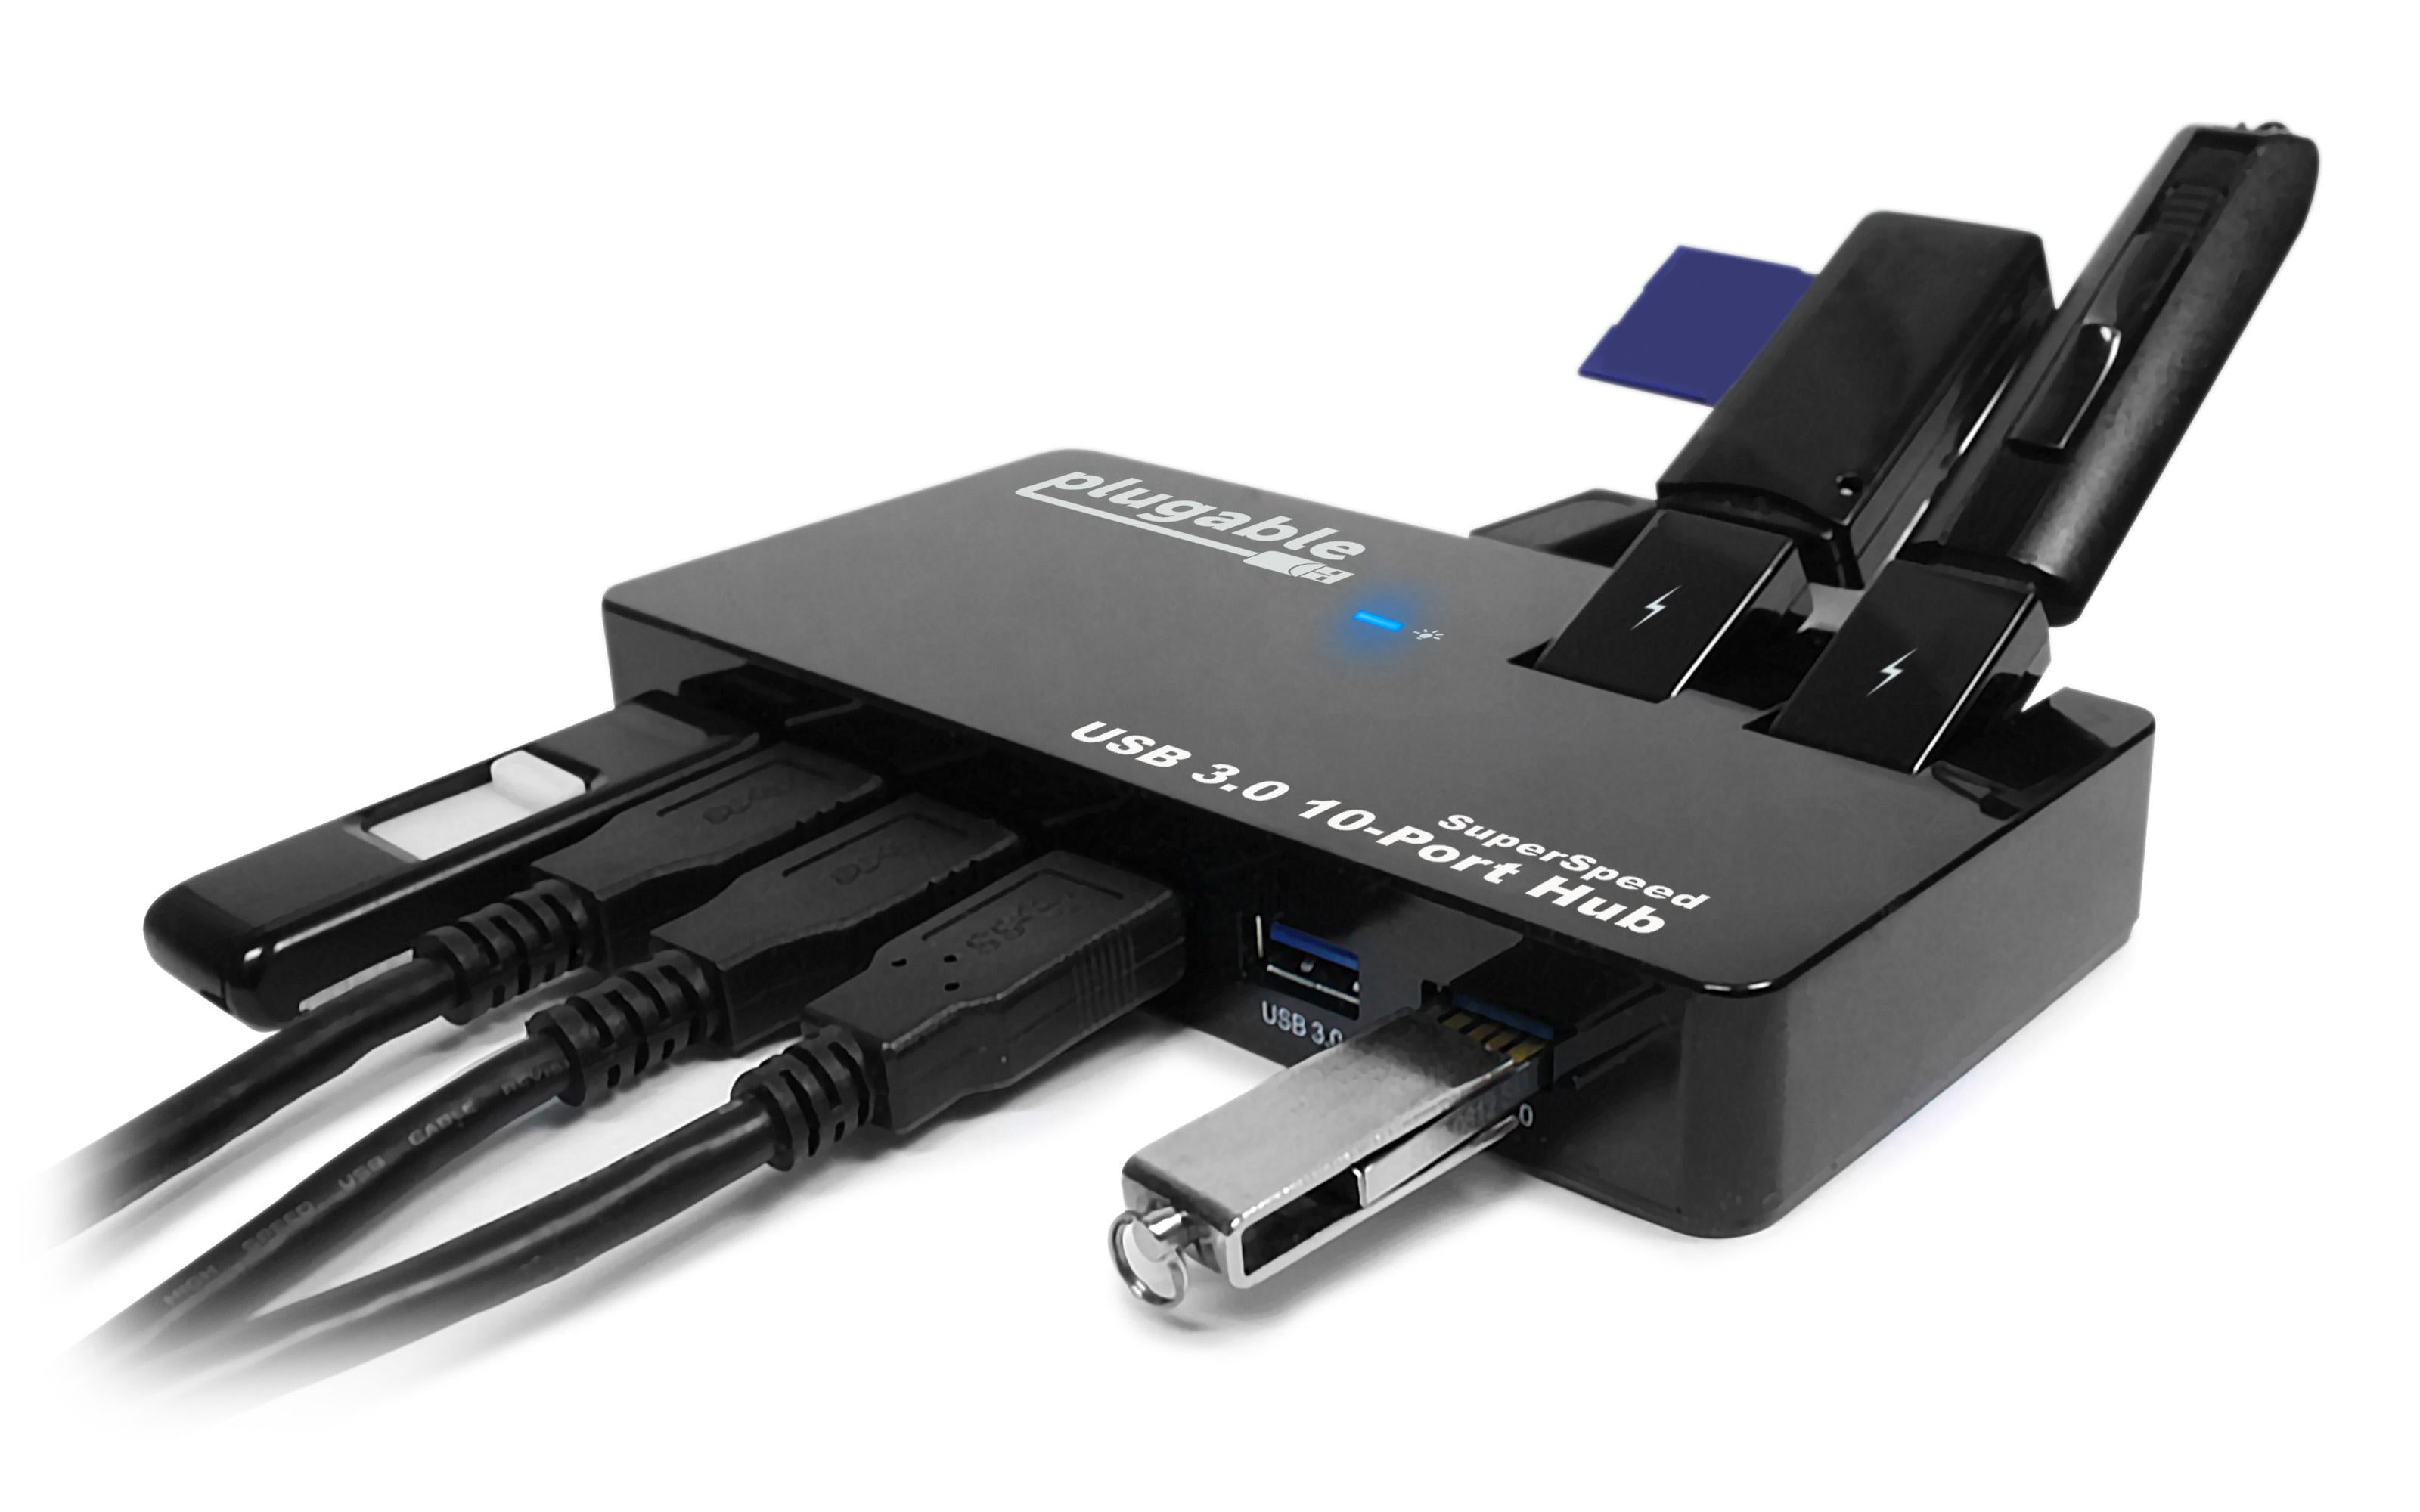 4 Port USB 3.0 Hub - USB Type-A Hub with 1x USB-C & 3x USB-A Ports  (SuperSpeed 5Gbps) - USB Bus Powered - USB 3.2 Gen 1 Adapter Hub -  Portable/Laptop